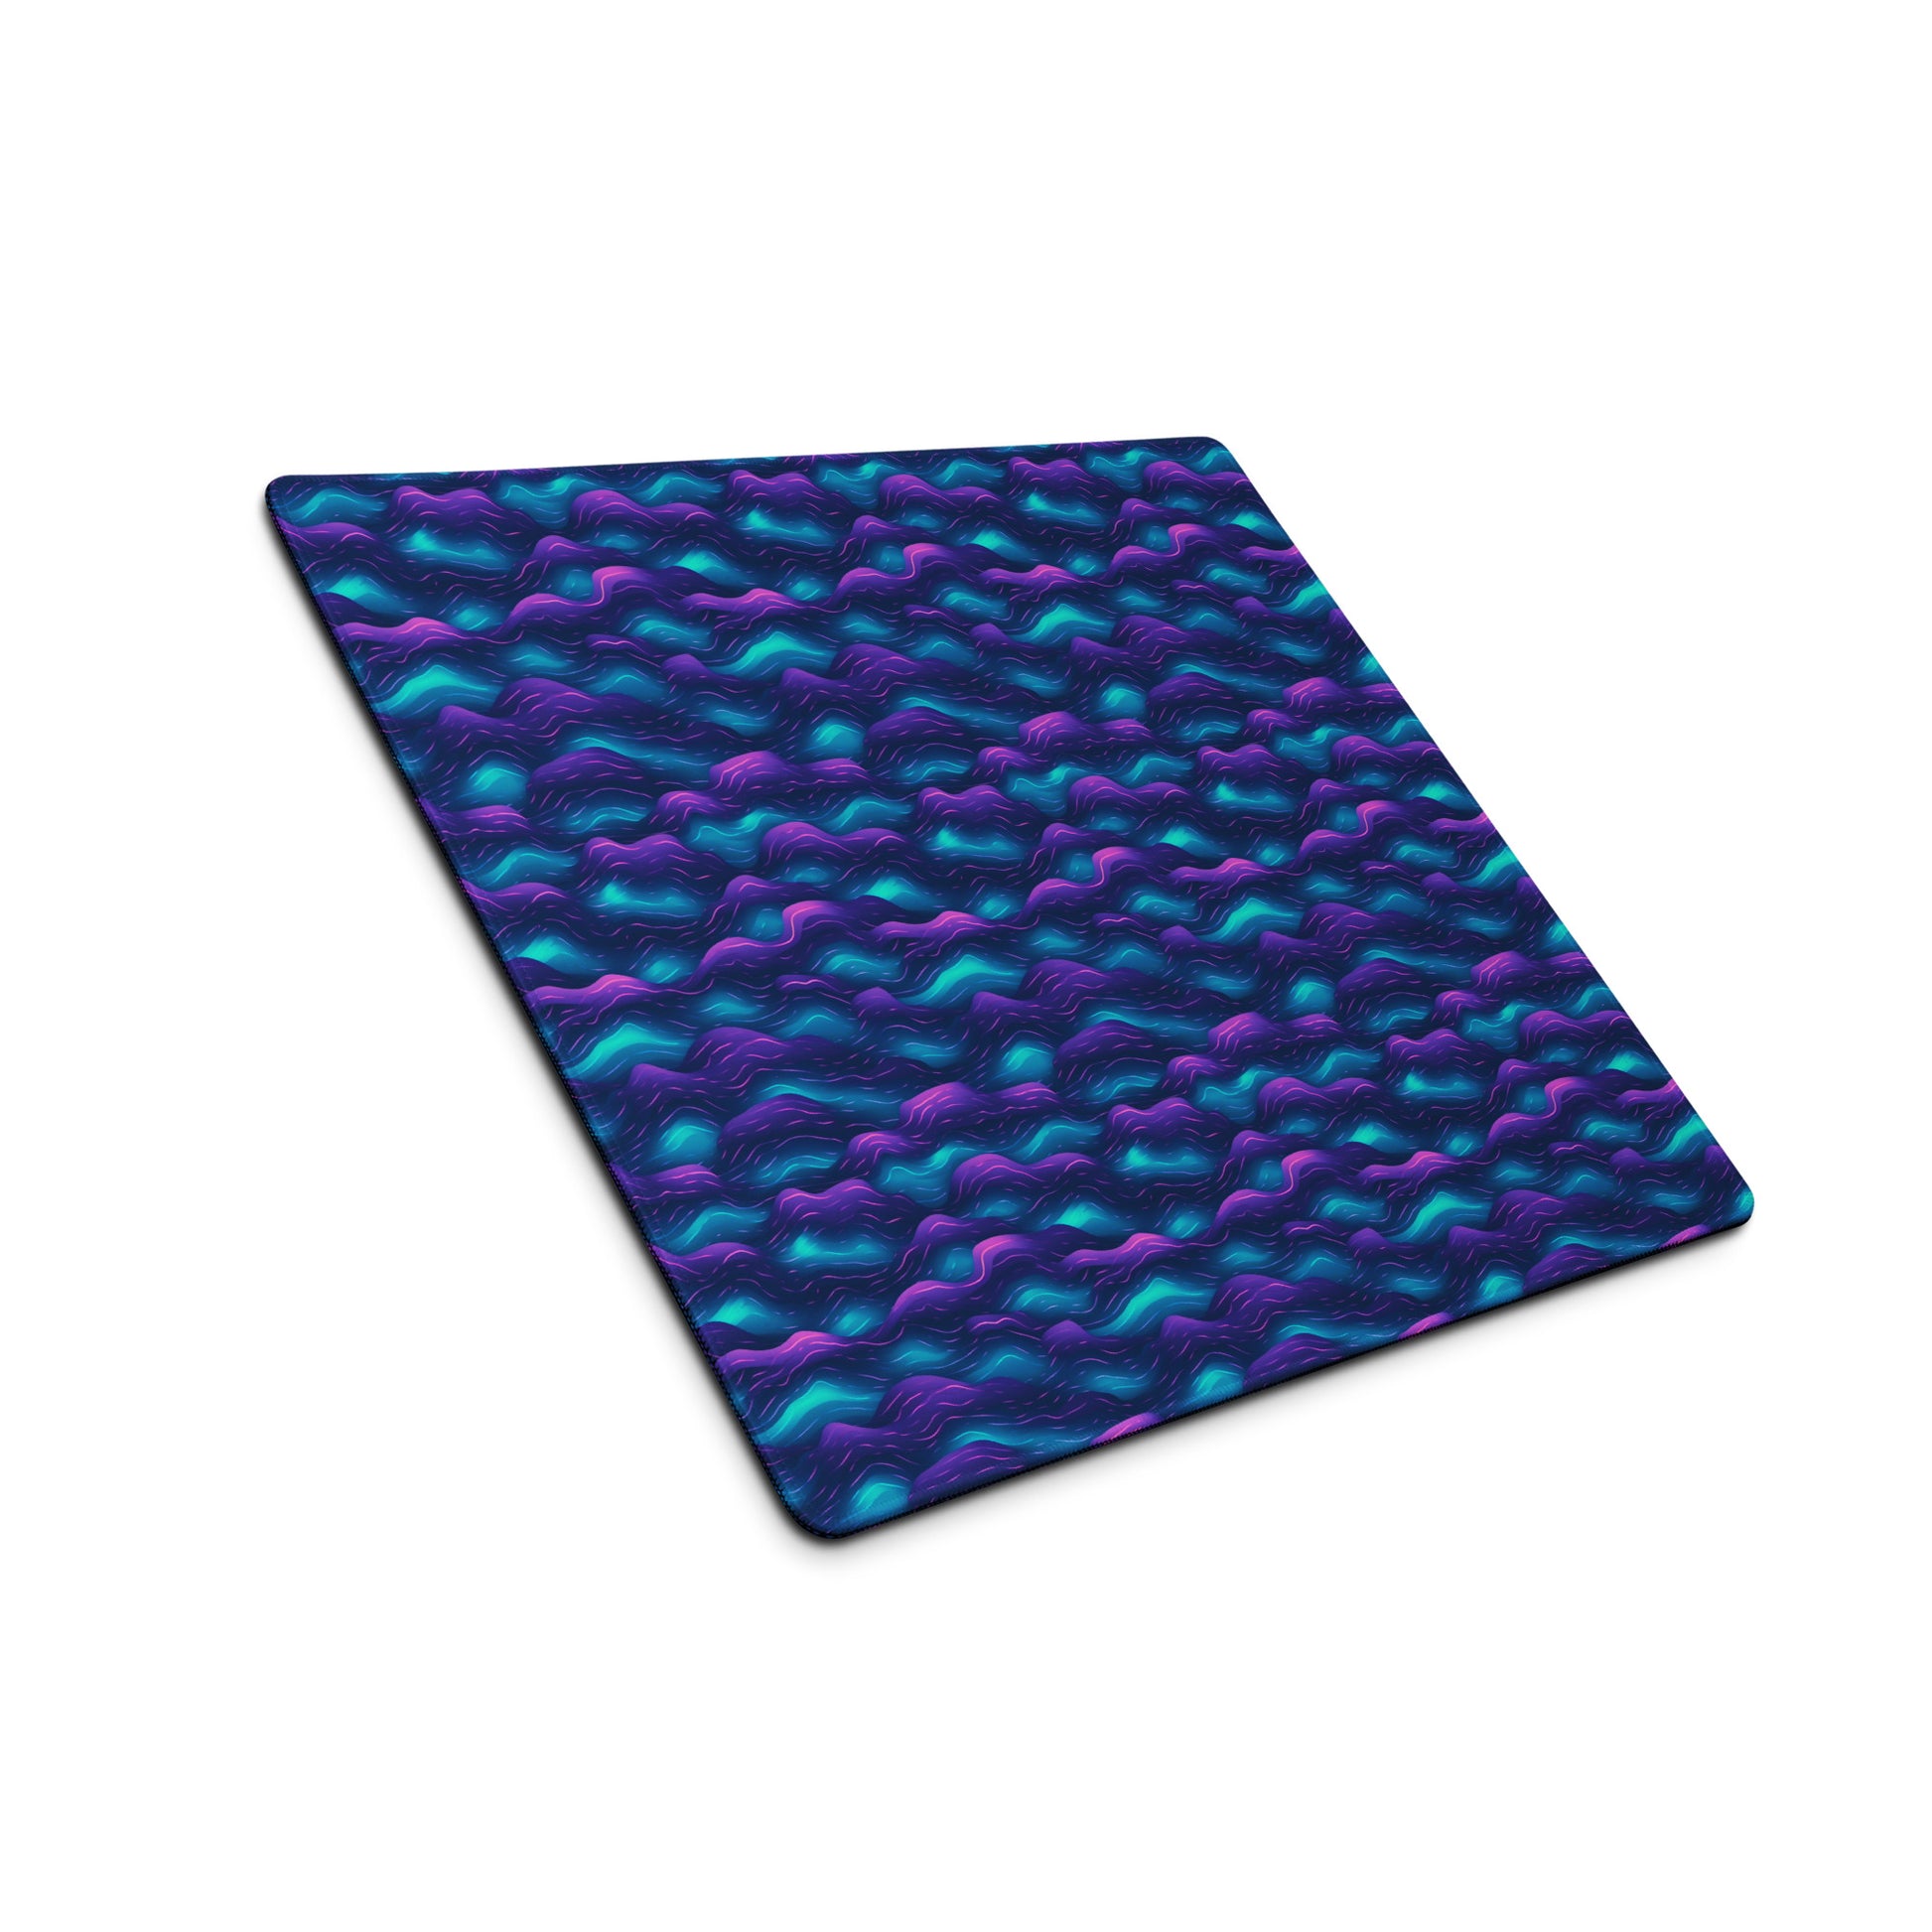 A 18" x 16" desk pad with blue and purple wave pattern sitting at ana angle.